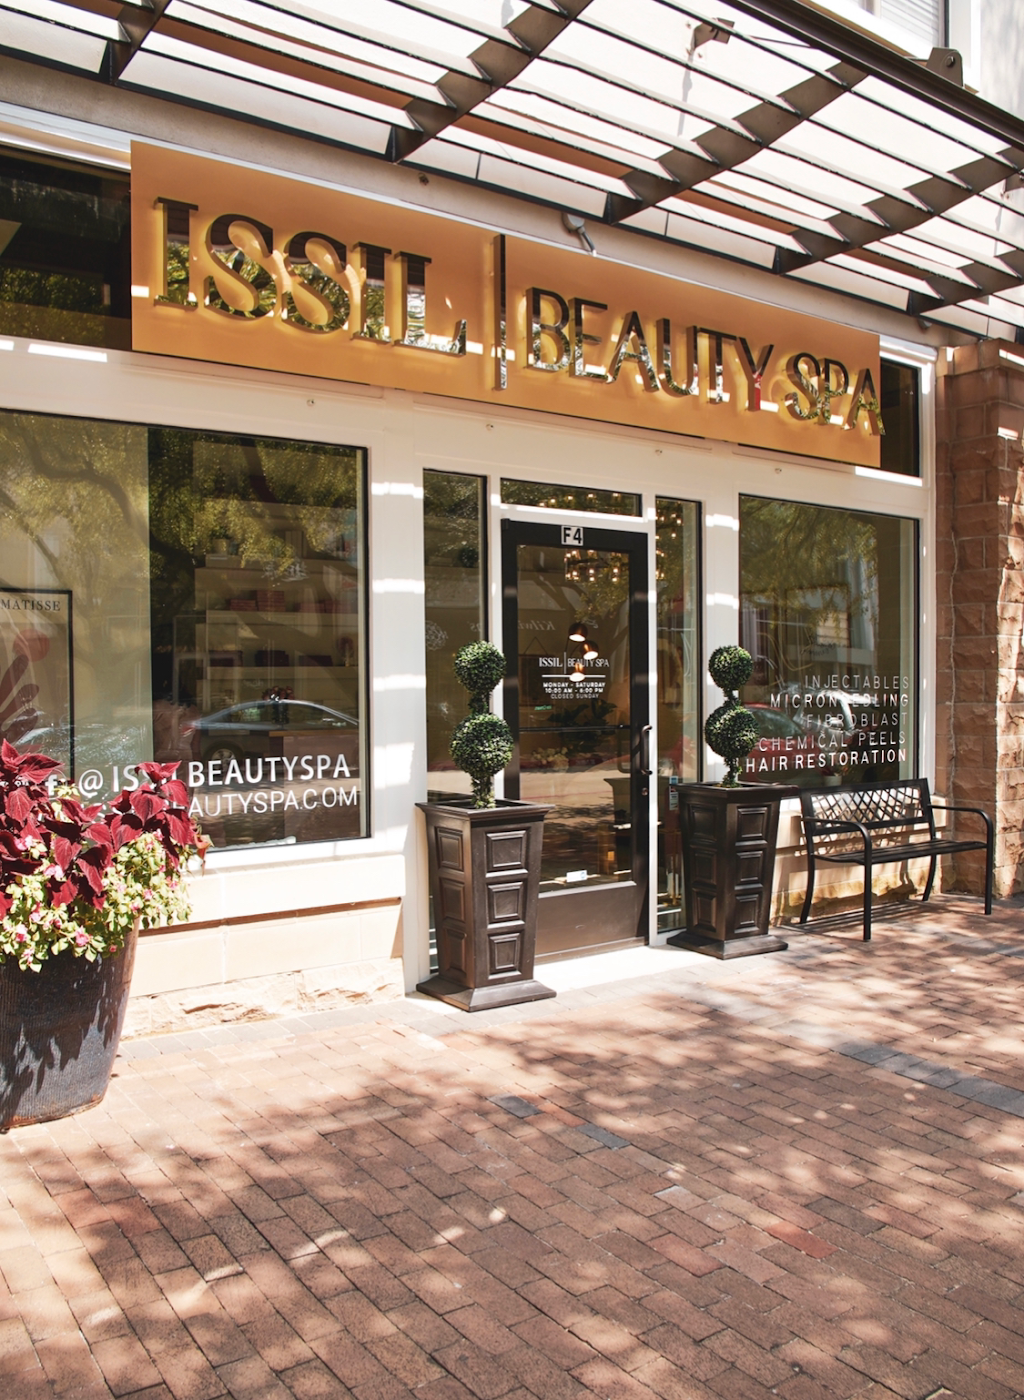 Issil Beauty Spa | 7140 Bishop Rd Suite F4, Plano, TX 75024, USA | Phone: (945) 400-6580